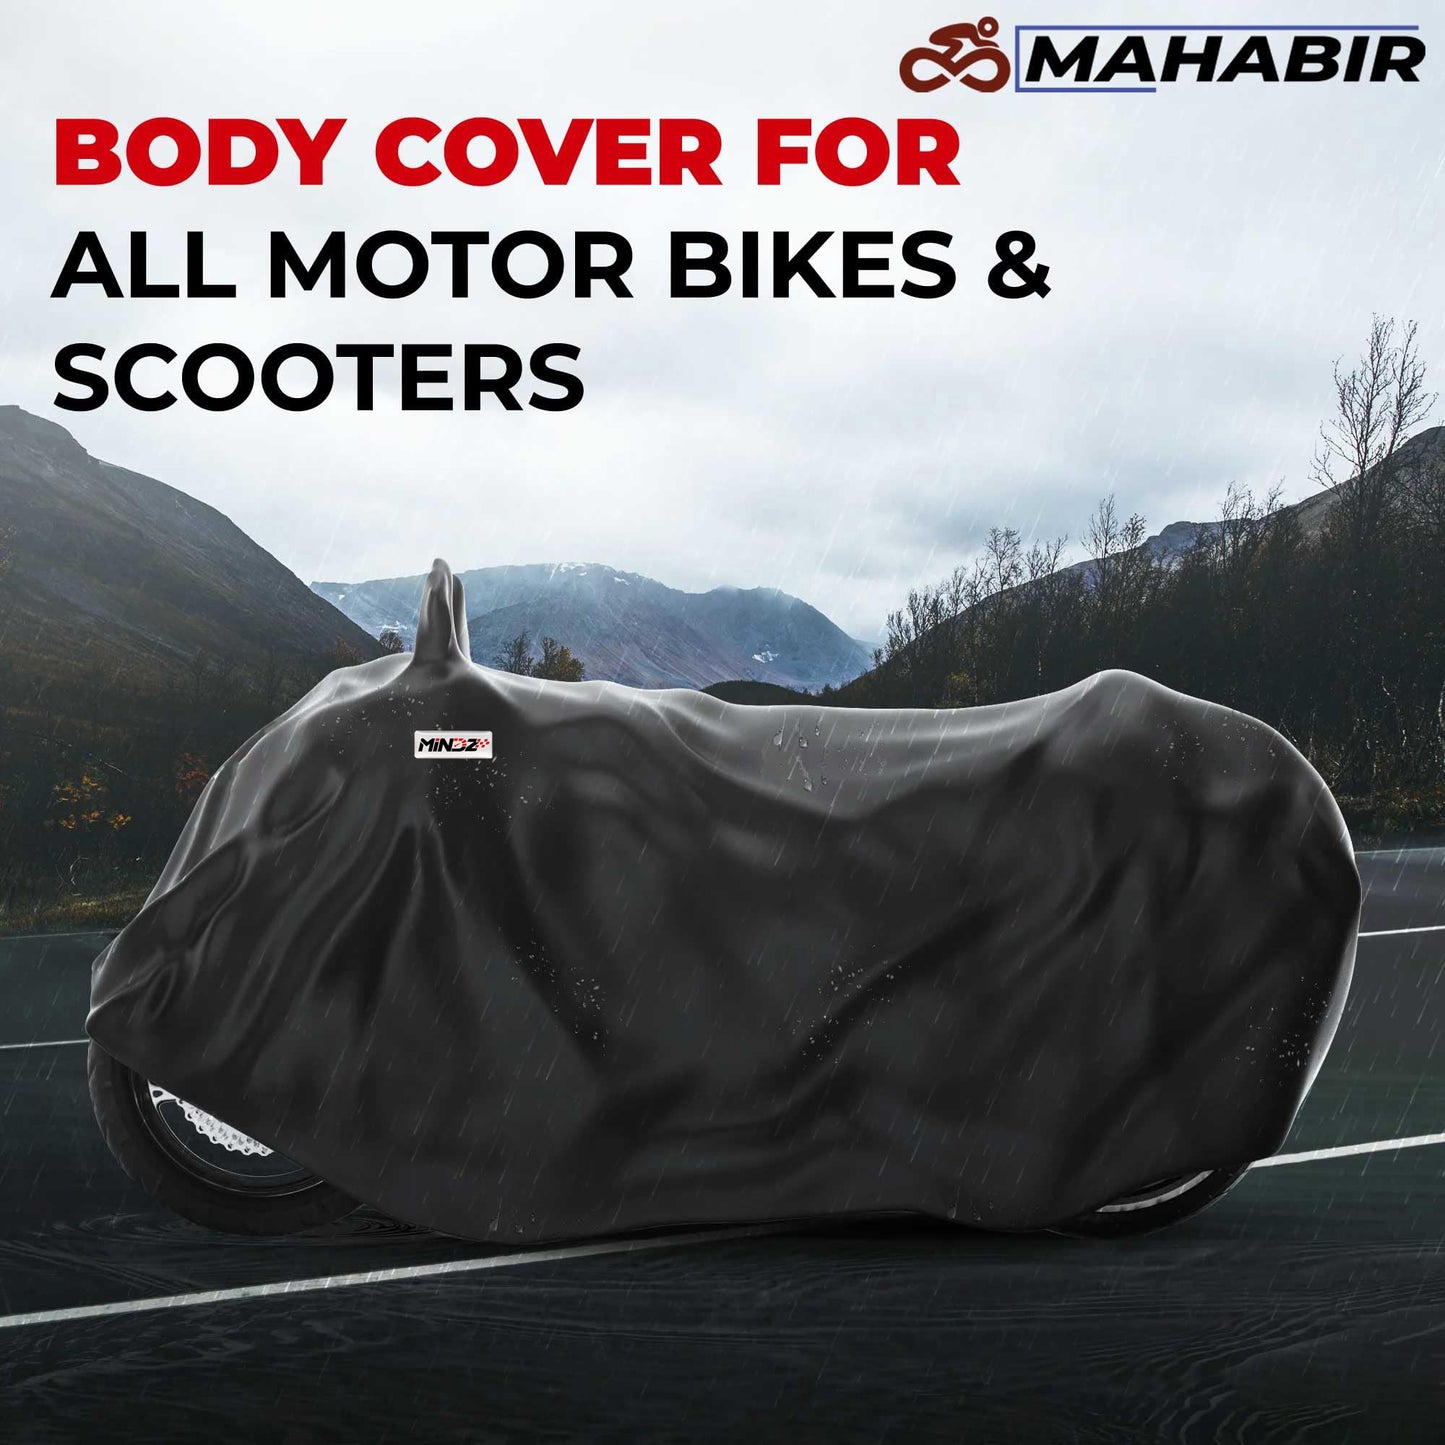 BODY COVER FOR MT 15